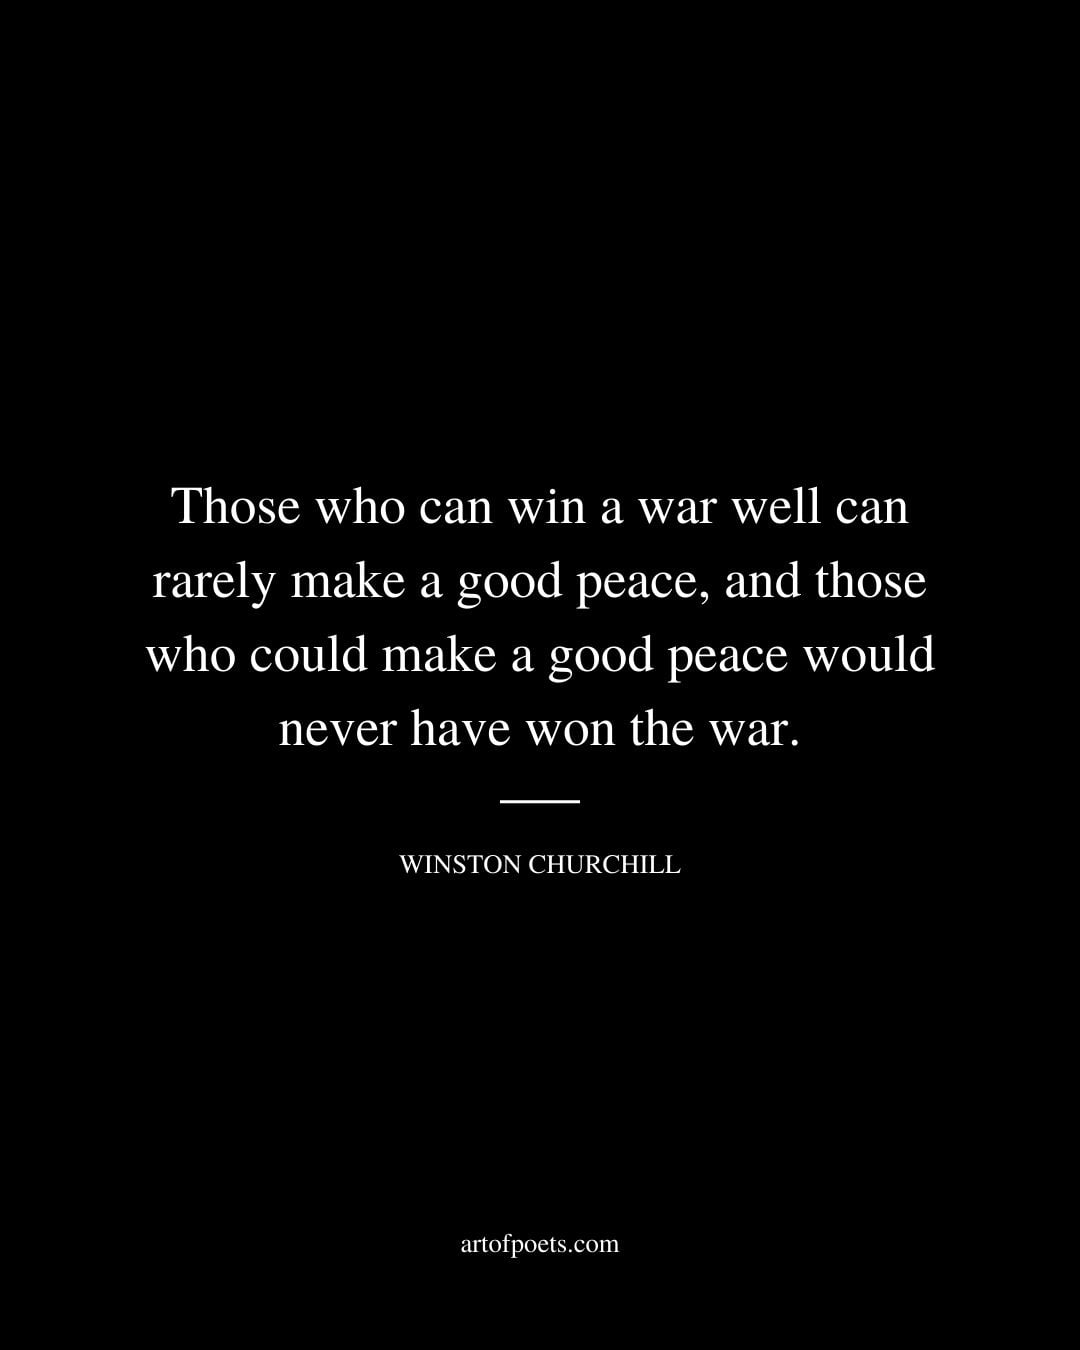 Those who can win a war well can rarely make a good peace and those who could make a good peace would never have won the war